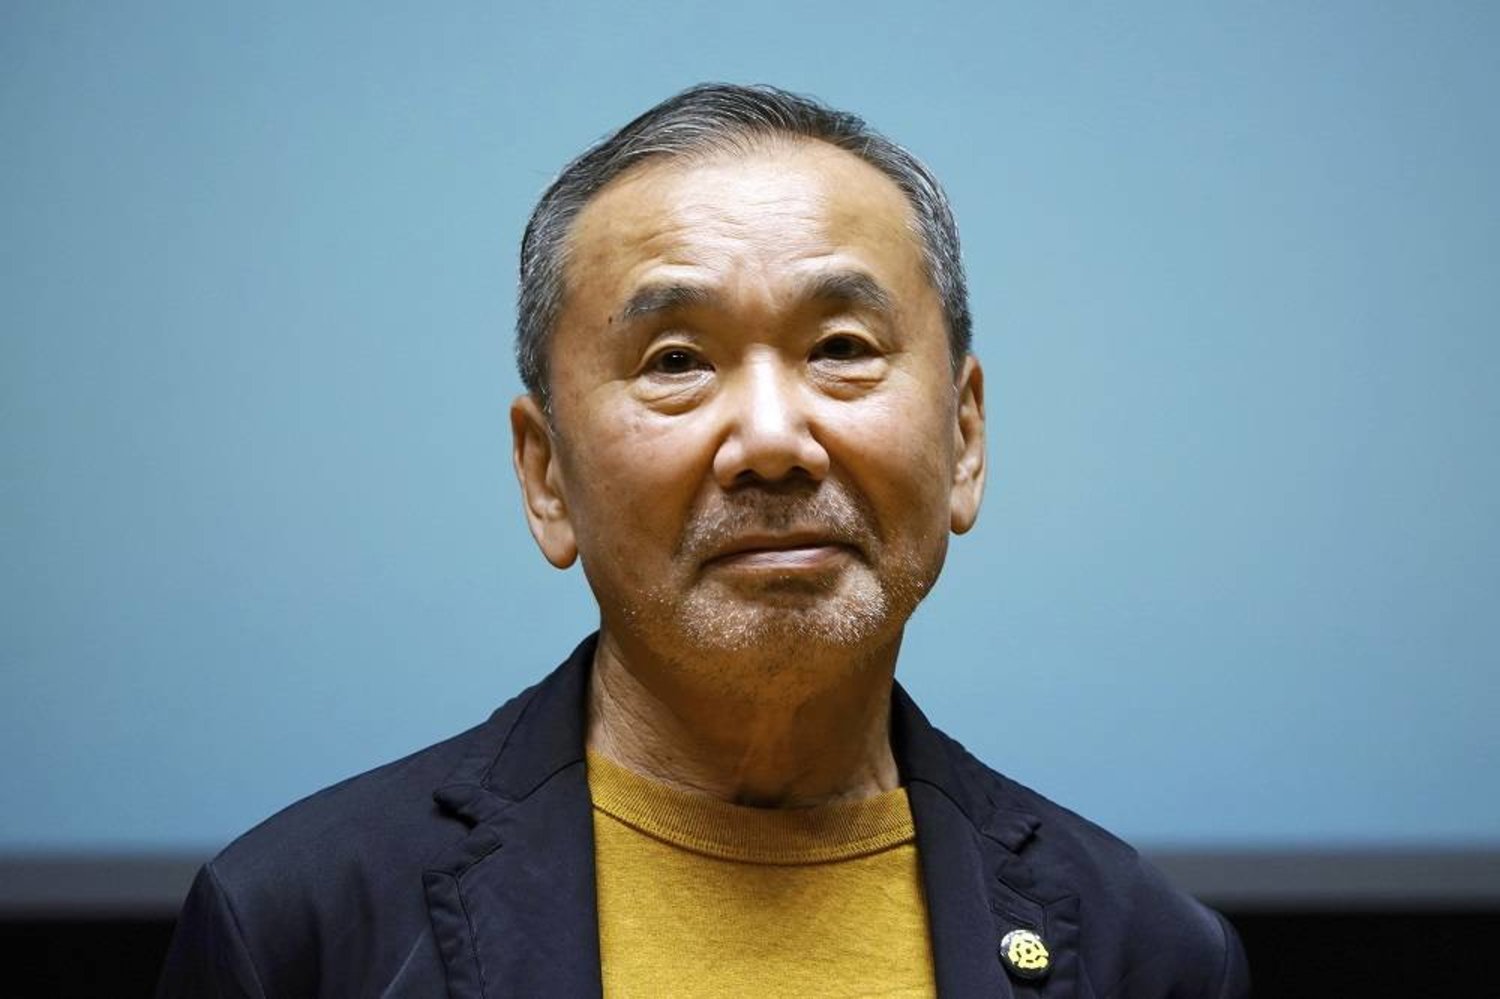 Japanese novelist Haruki Murakami poses for media during a press conference on the university's new international house of literature, The Haruki Murakami Library, opening at the Waseda University in Tokyo, on Sept. 22, 2021. (AP)